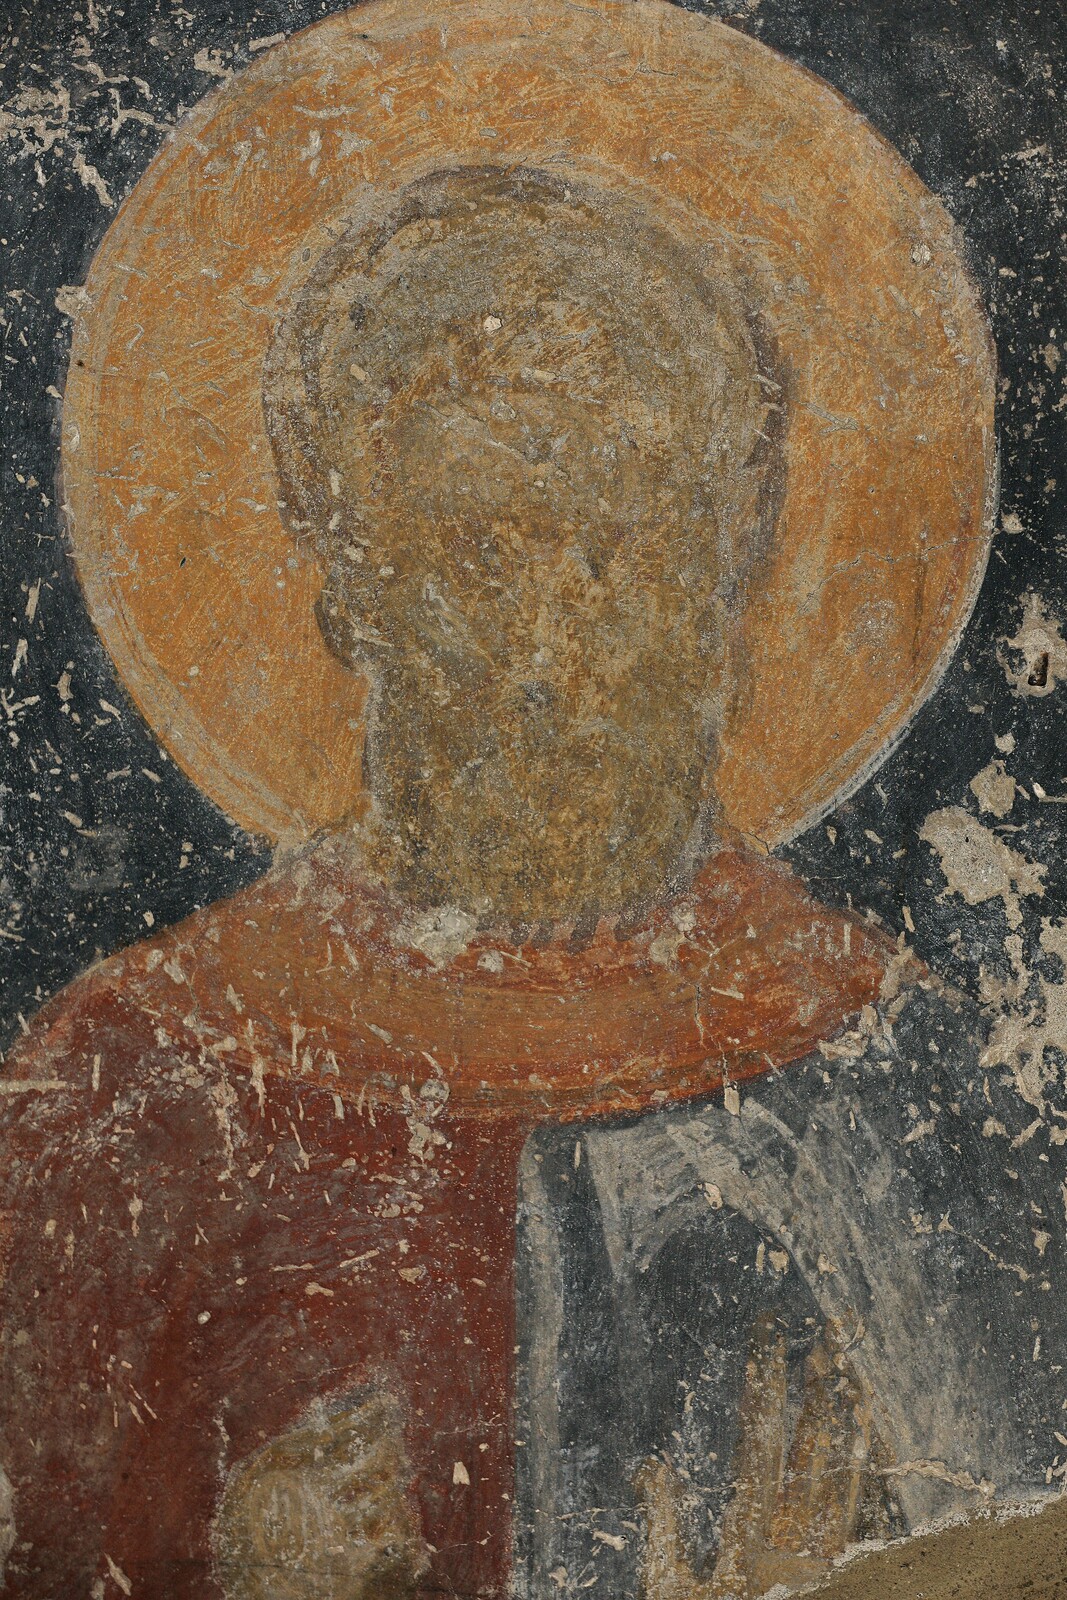 Unrecognized Holy Martyr, detail